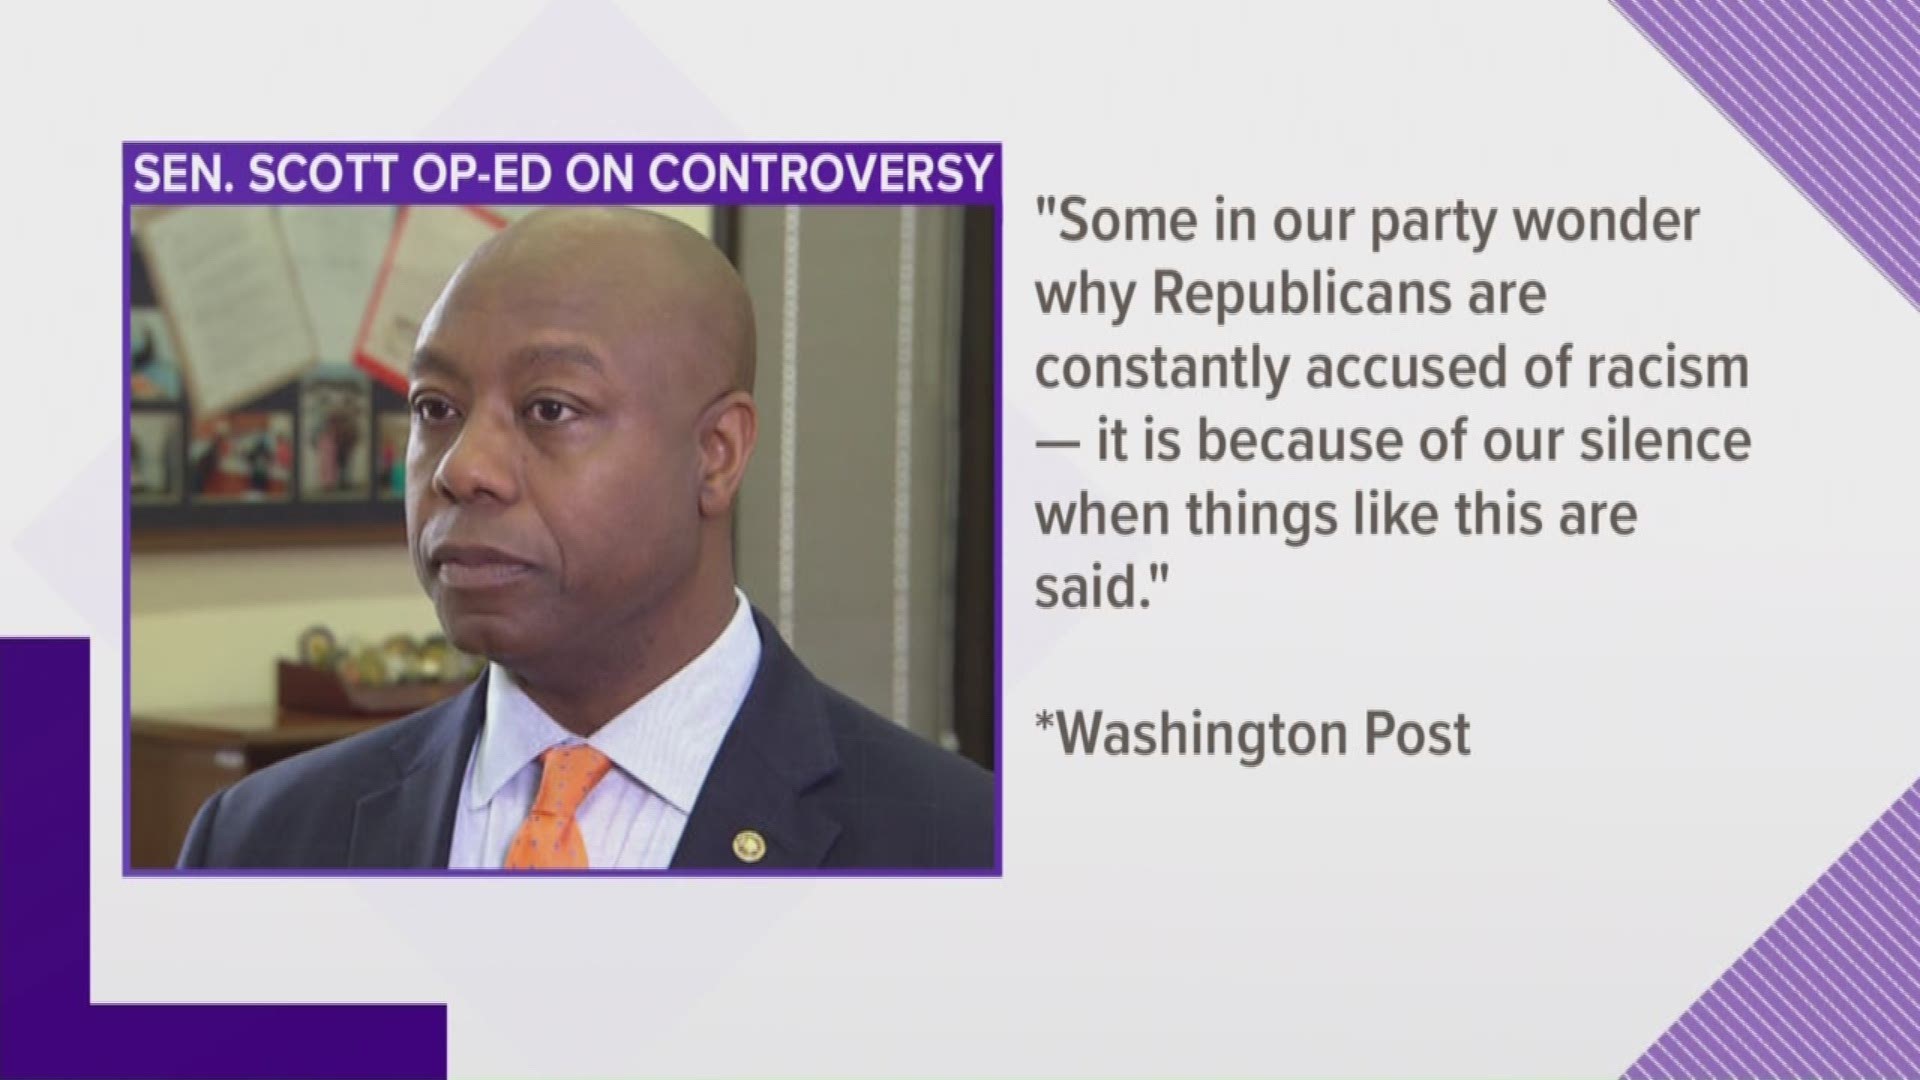 South Carolina U.S. senator Tim Scott is speaking out about controversial comments made by Iowa U.S. representative Steve King.